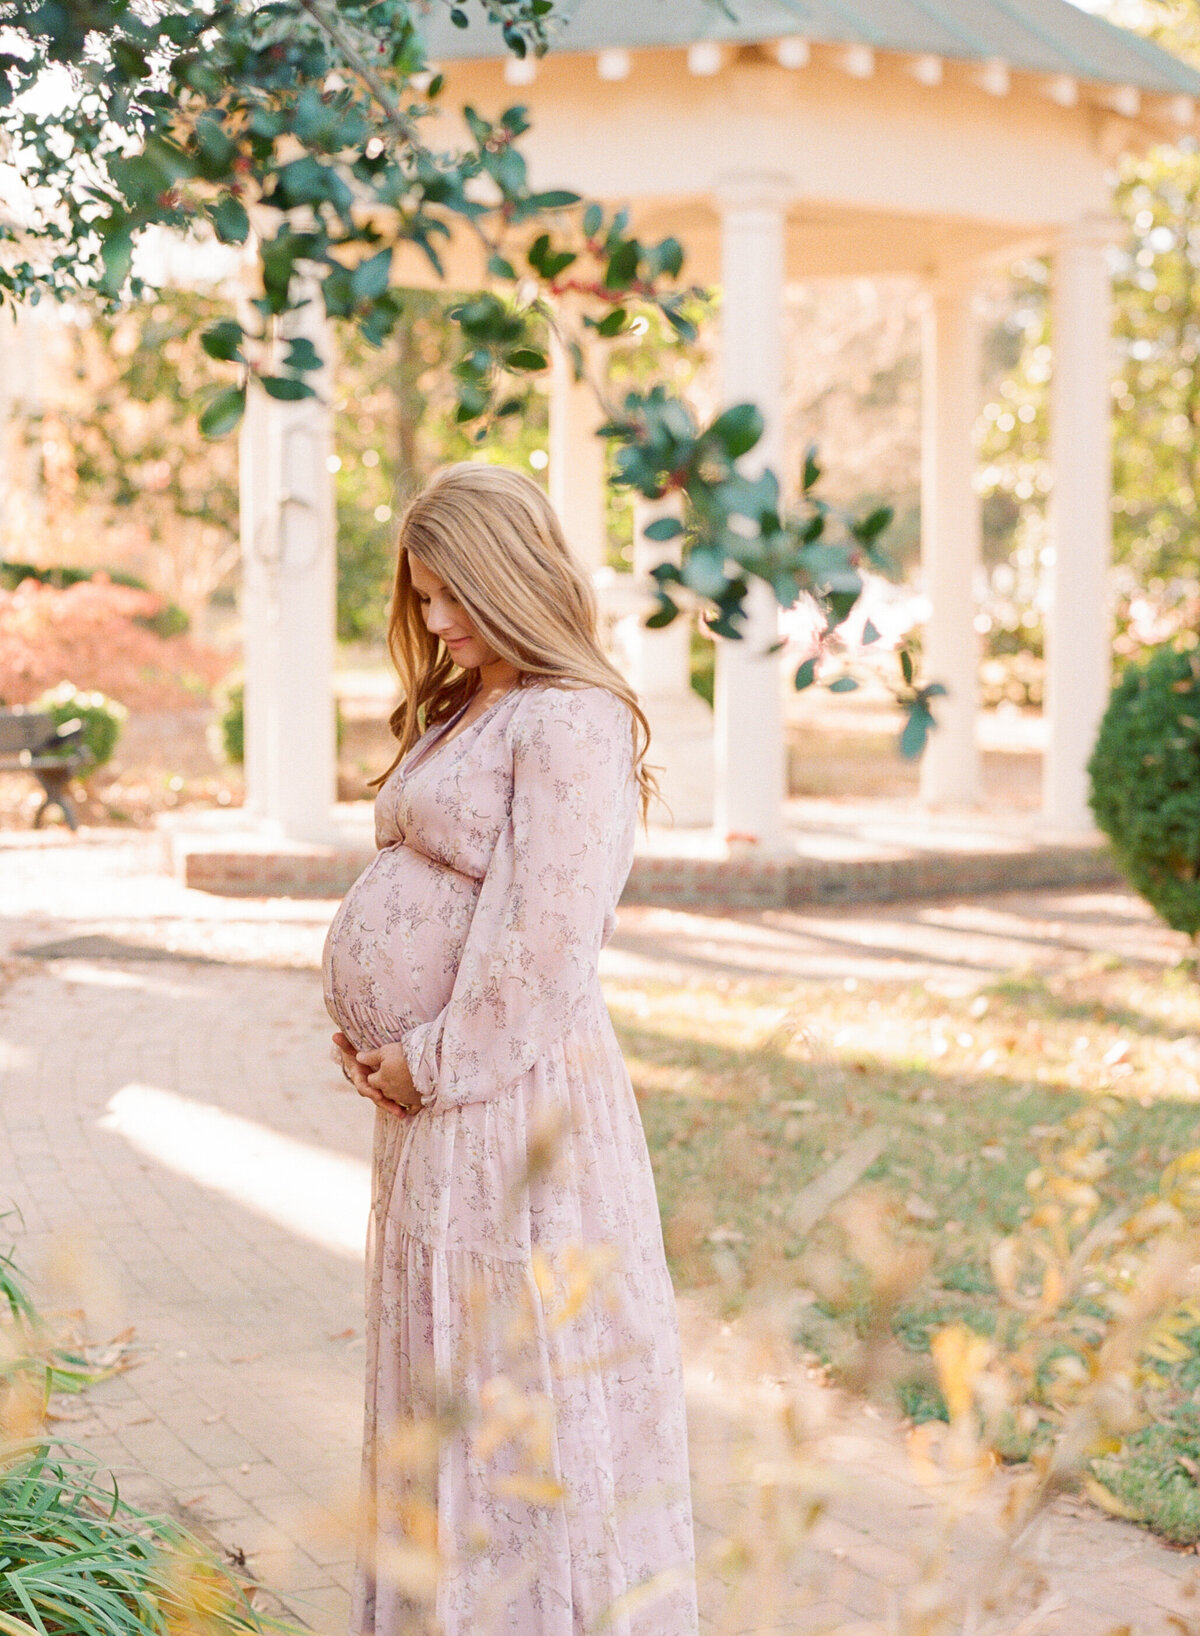 Mom staring down at her growing belly during her maternity session. Photographed by Raleigh maternity photograph A.J. Dunlap Photography.